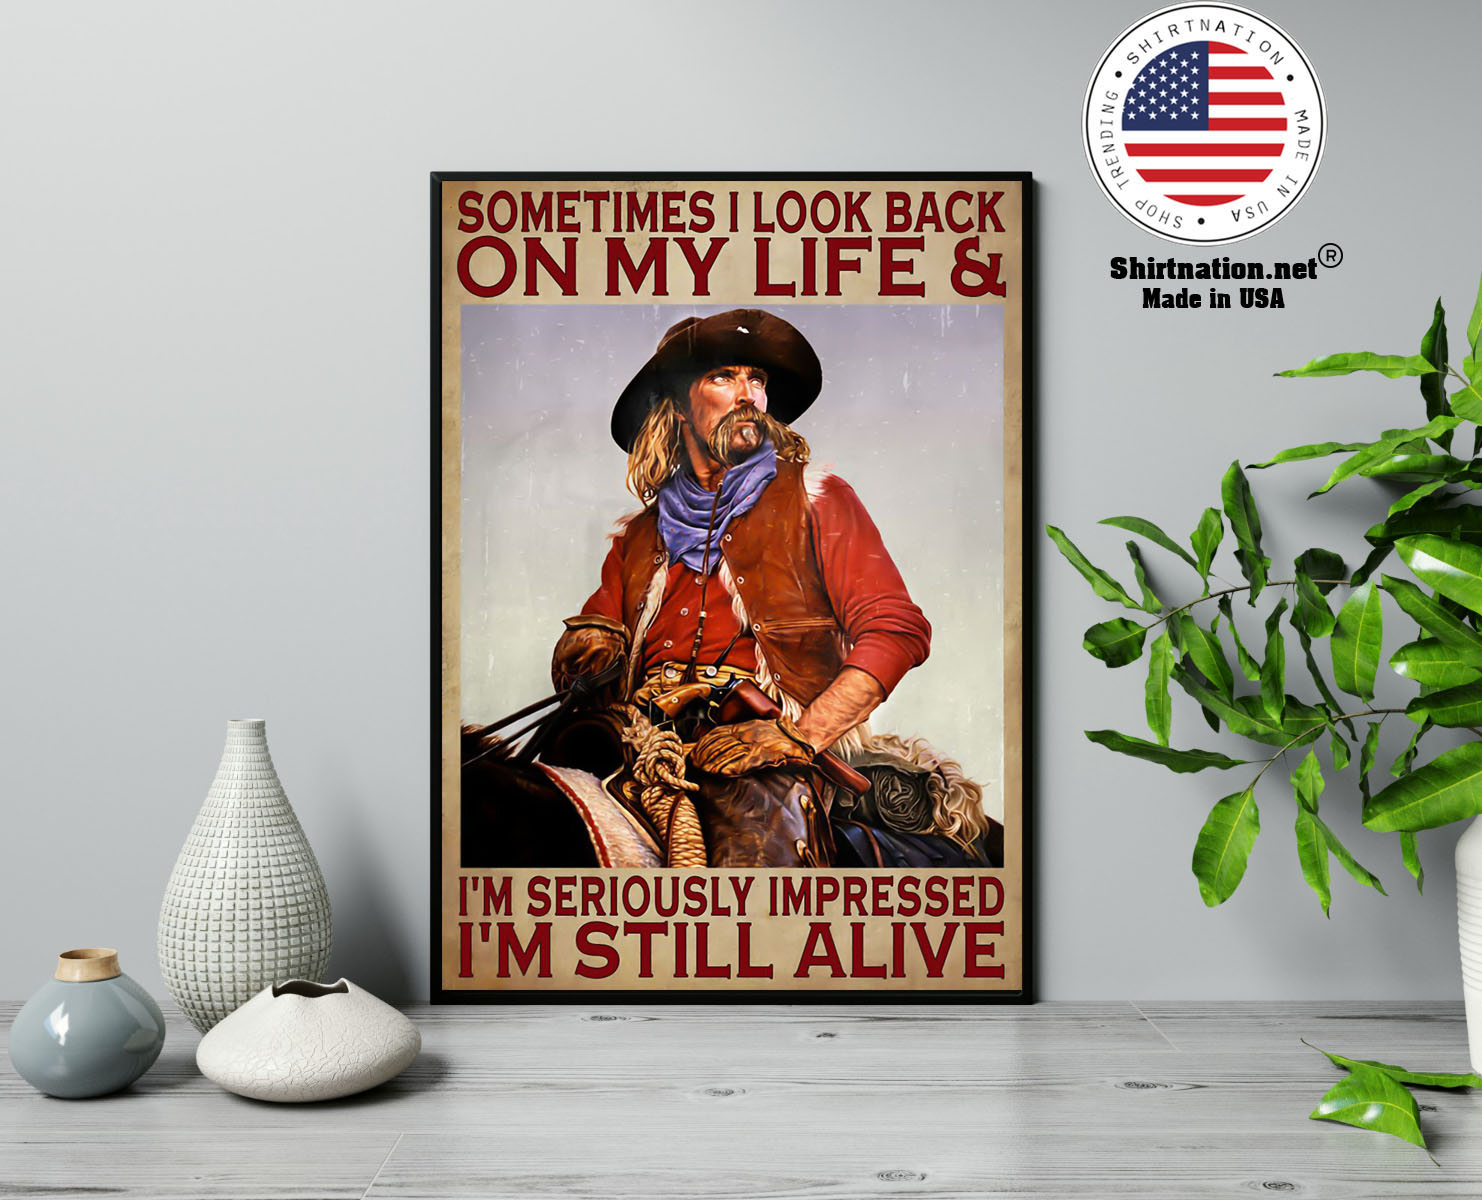 Sometimes I look back on my life and Im seriously impressed Im still alive poster 13